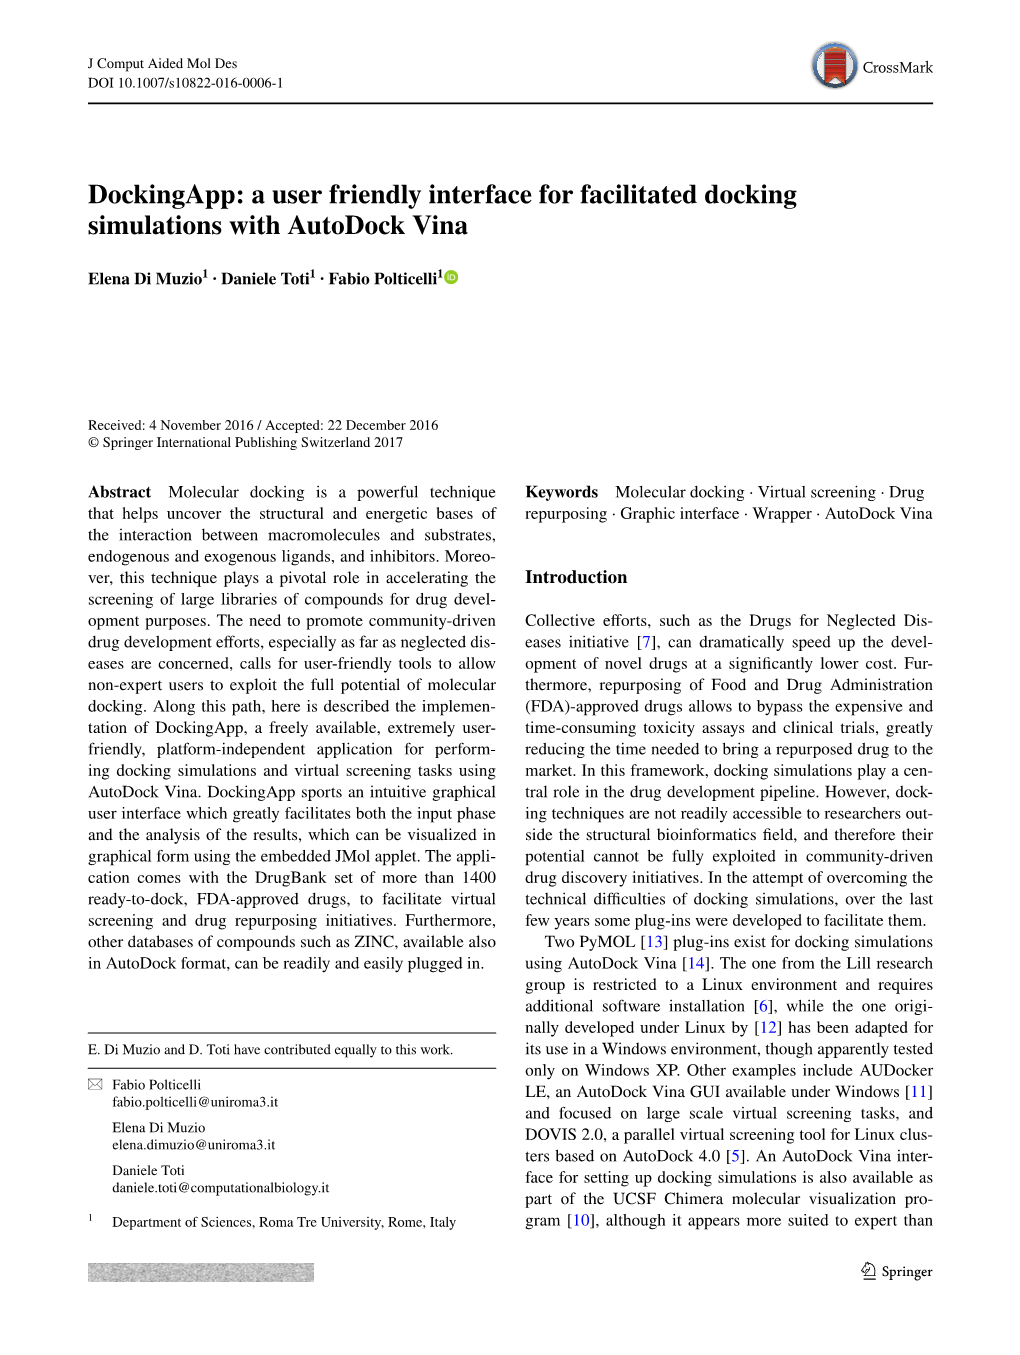 Dockingapp: a User Friendly Interface for Facilitated Docking Simulations with Autodock Vina